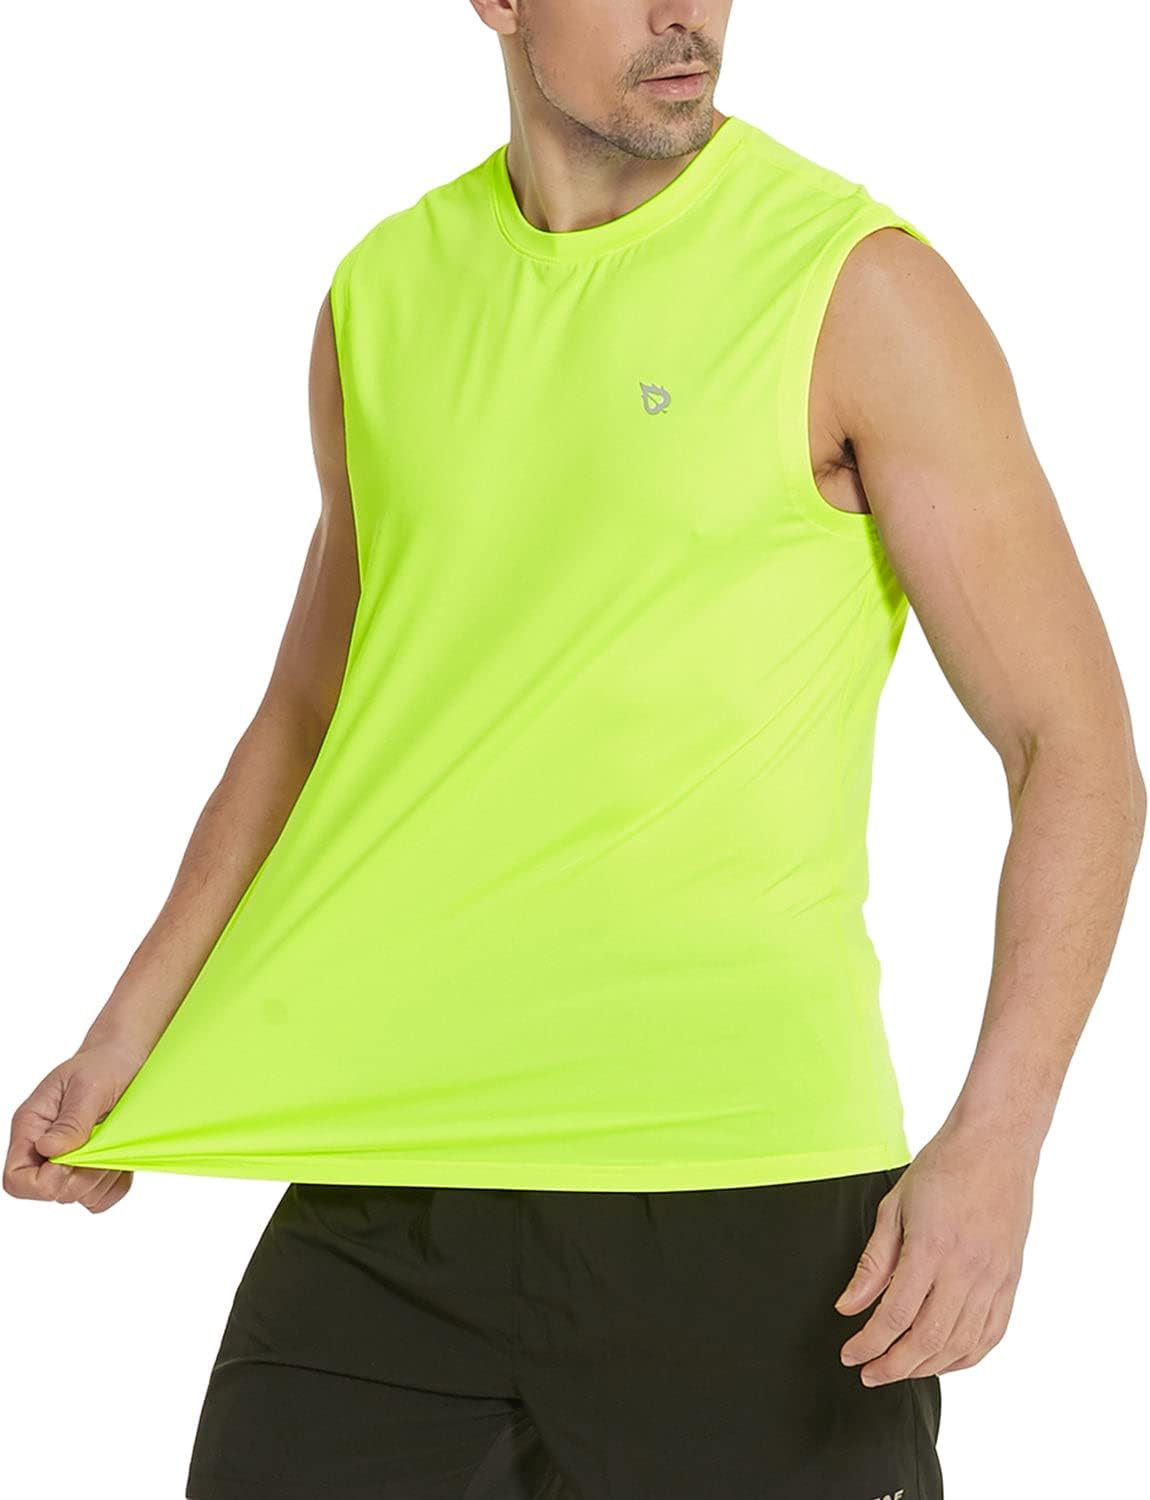 Men's Tank Tops Sleeveless Shirts Gym Workout Running Athletic Quick Dry Tech